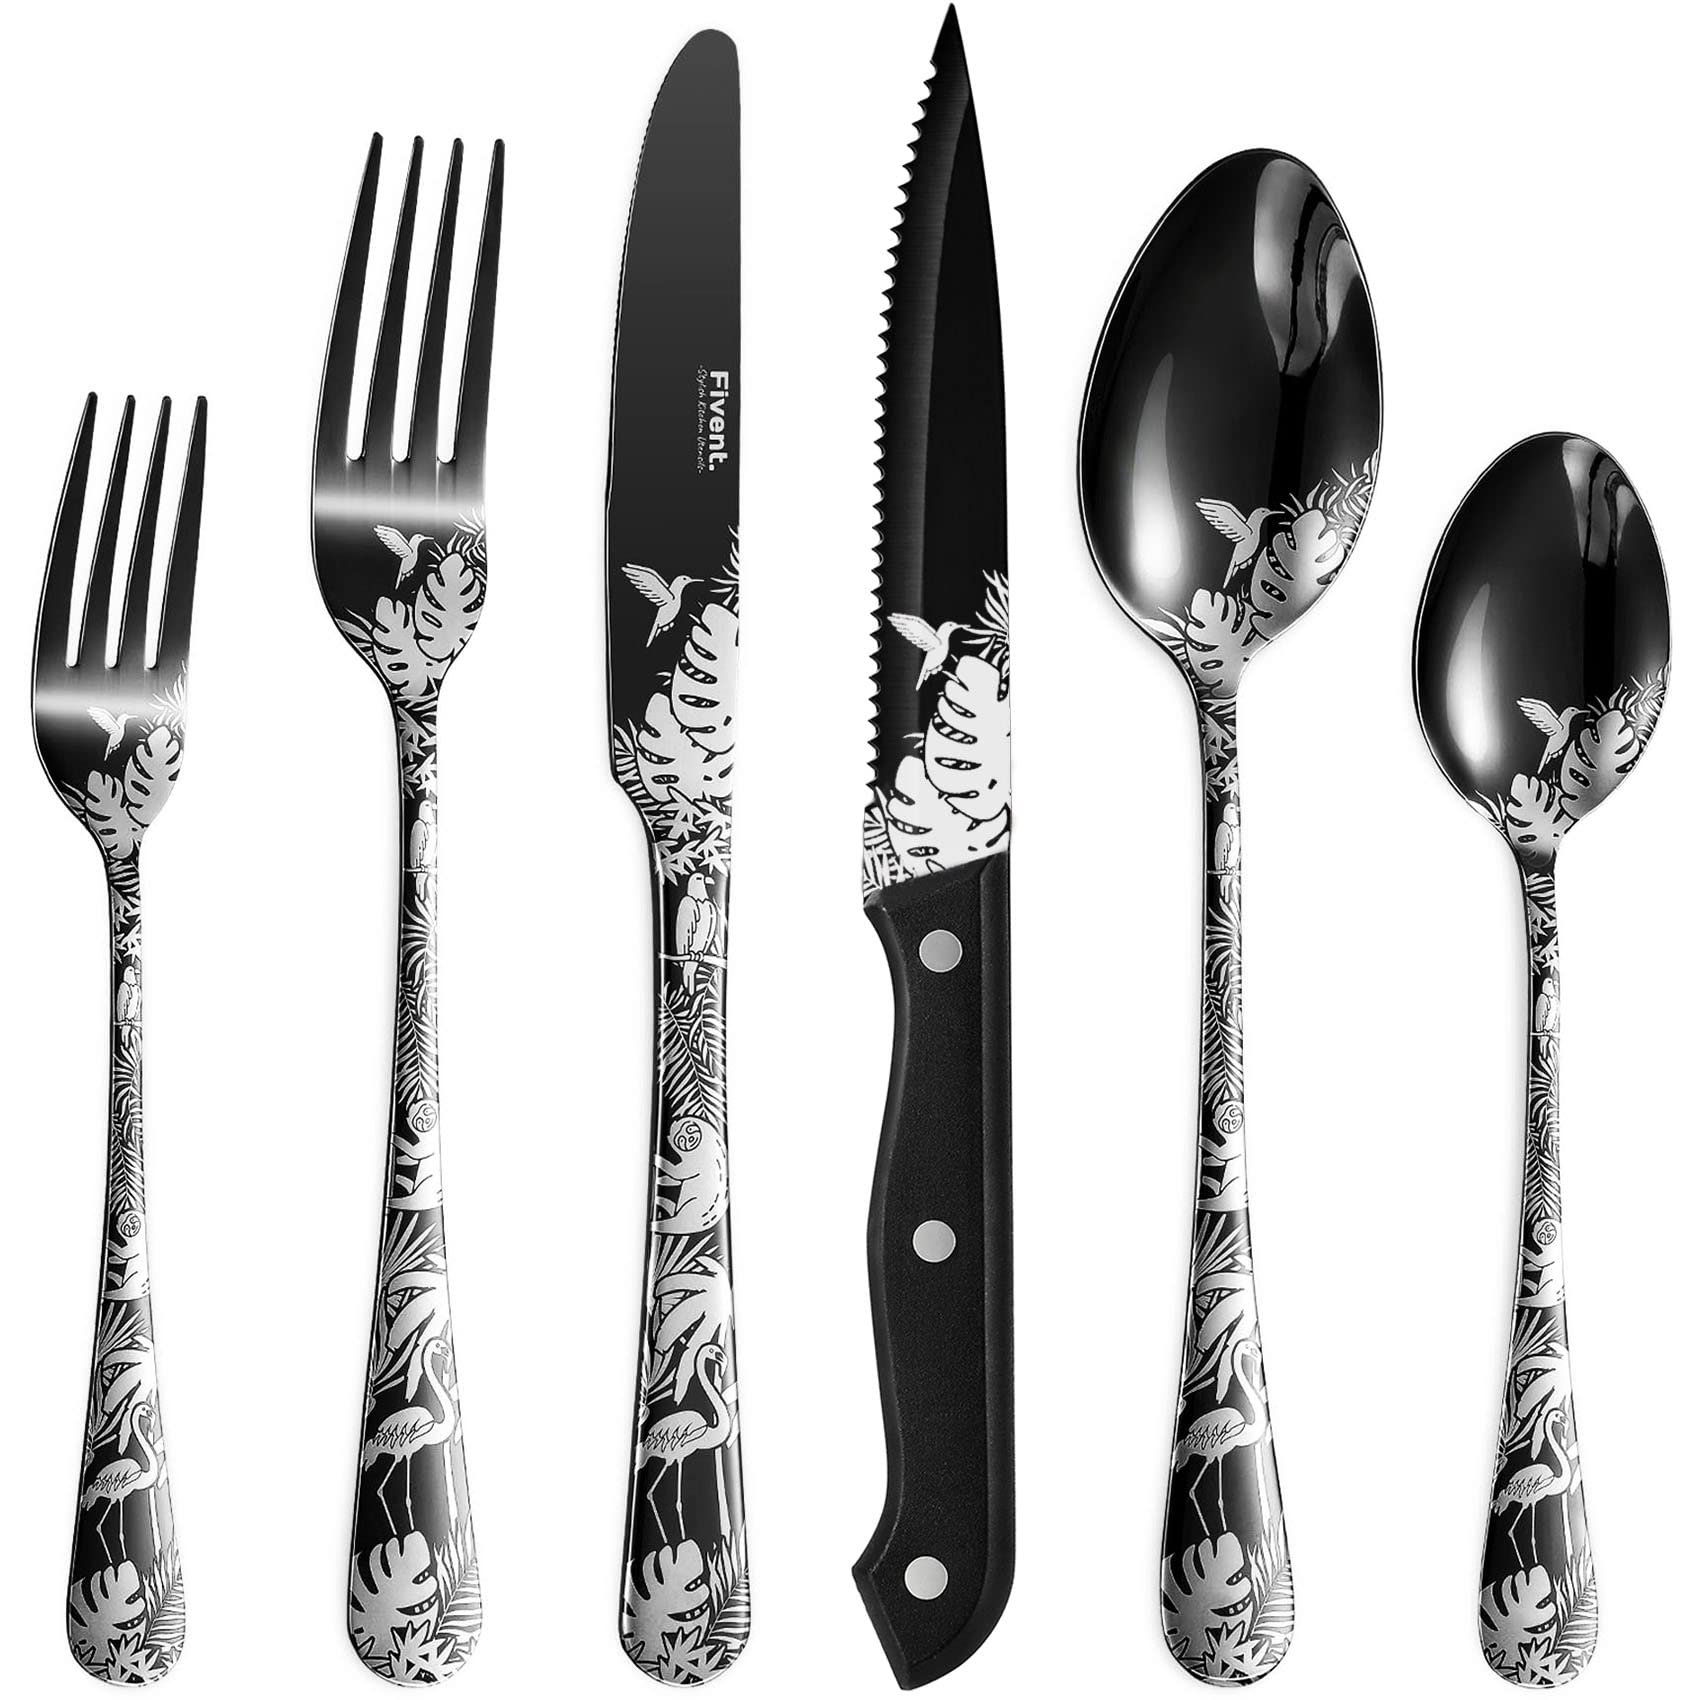 24 Pcs Silverware Set with Steak Knives Service for 4,Stainless Steel  Flatware Set,Mirror Polished Cutlery Utensil Set,Home Kitchen Eating  Tableware